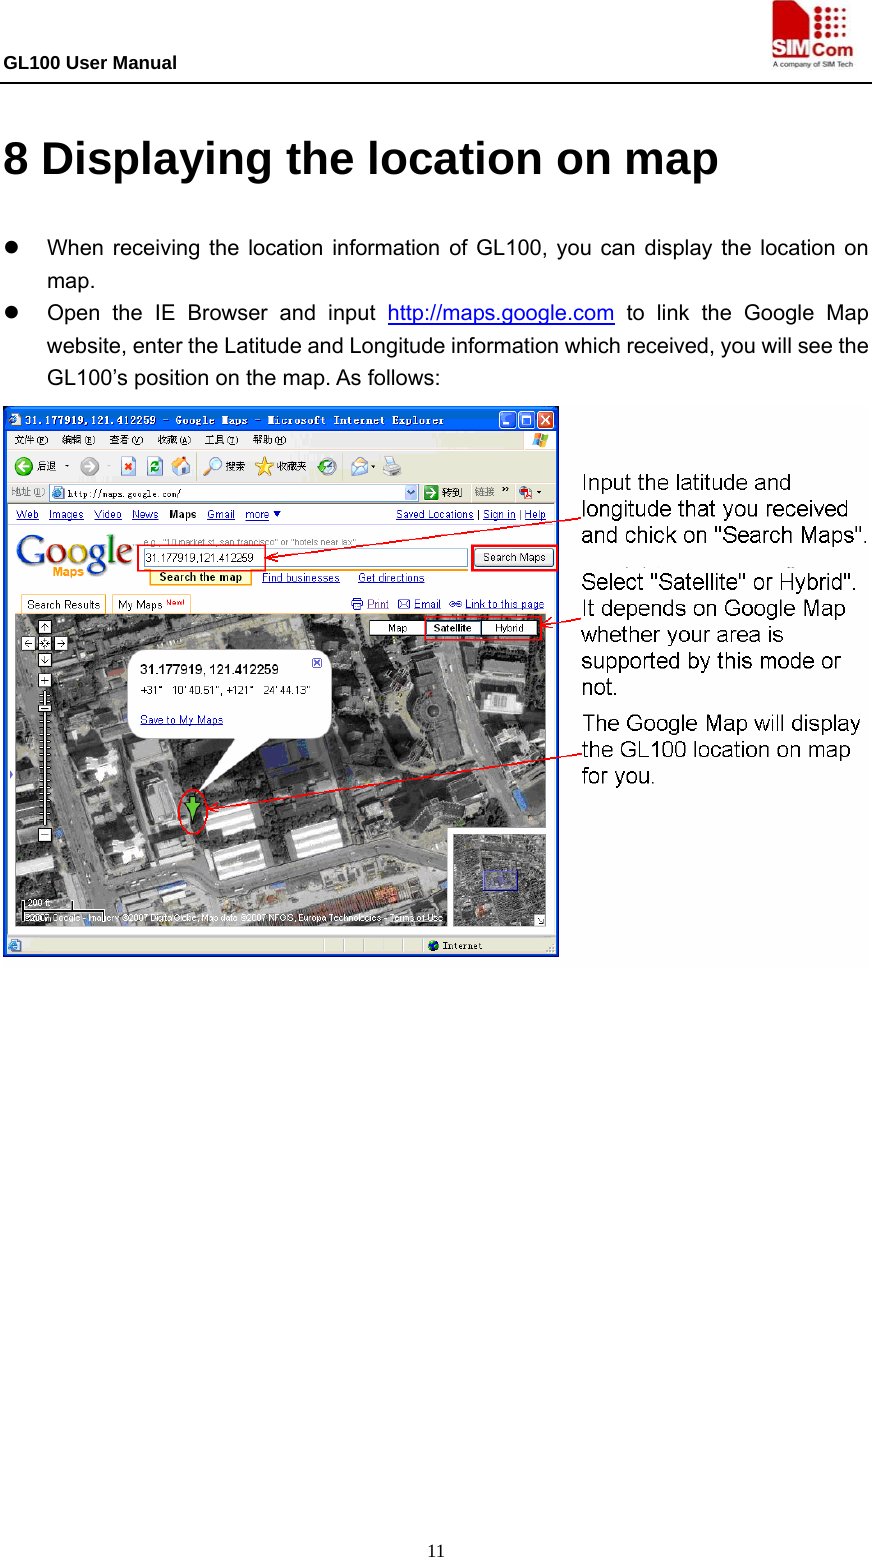 GL100 User Manual                                                                             11 8 Displaying the location on map   z  When receiving the location information of GL100, you can display the location on map.  z  Open the IE Browser and input http://maps.google.com to link the Google Map website, enter the Latitude and Longitude information which received, you will see the GL100’s position on the map. As follows:                   